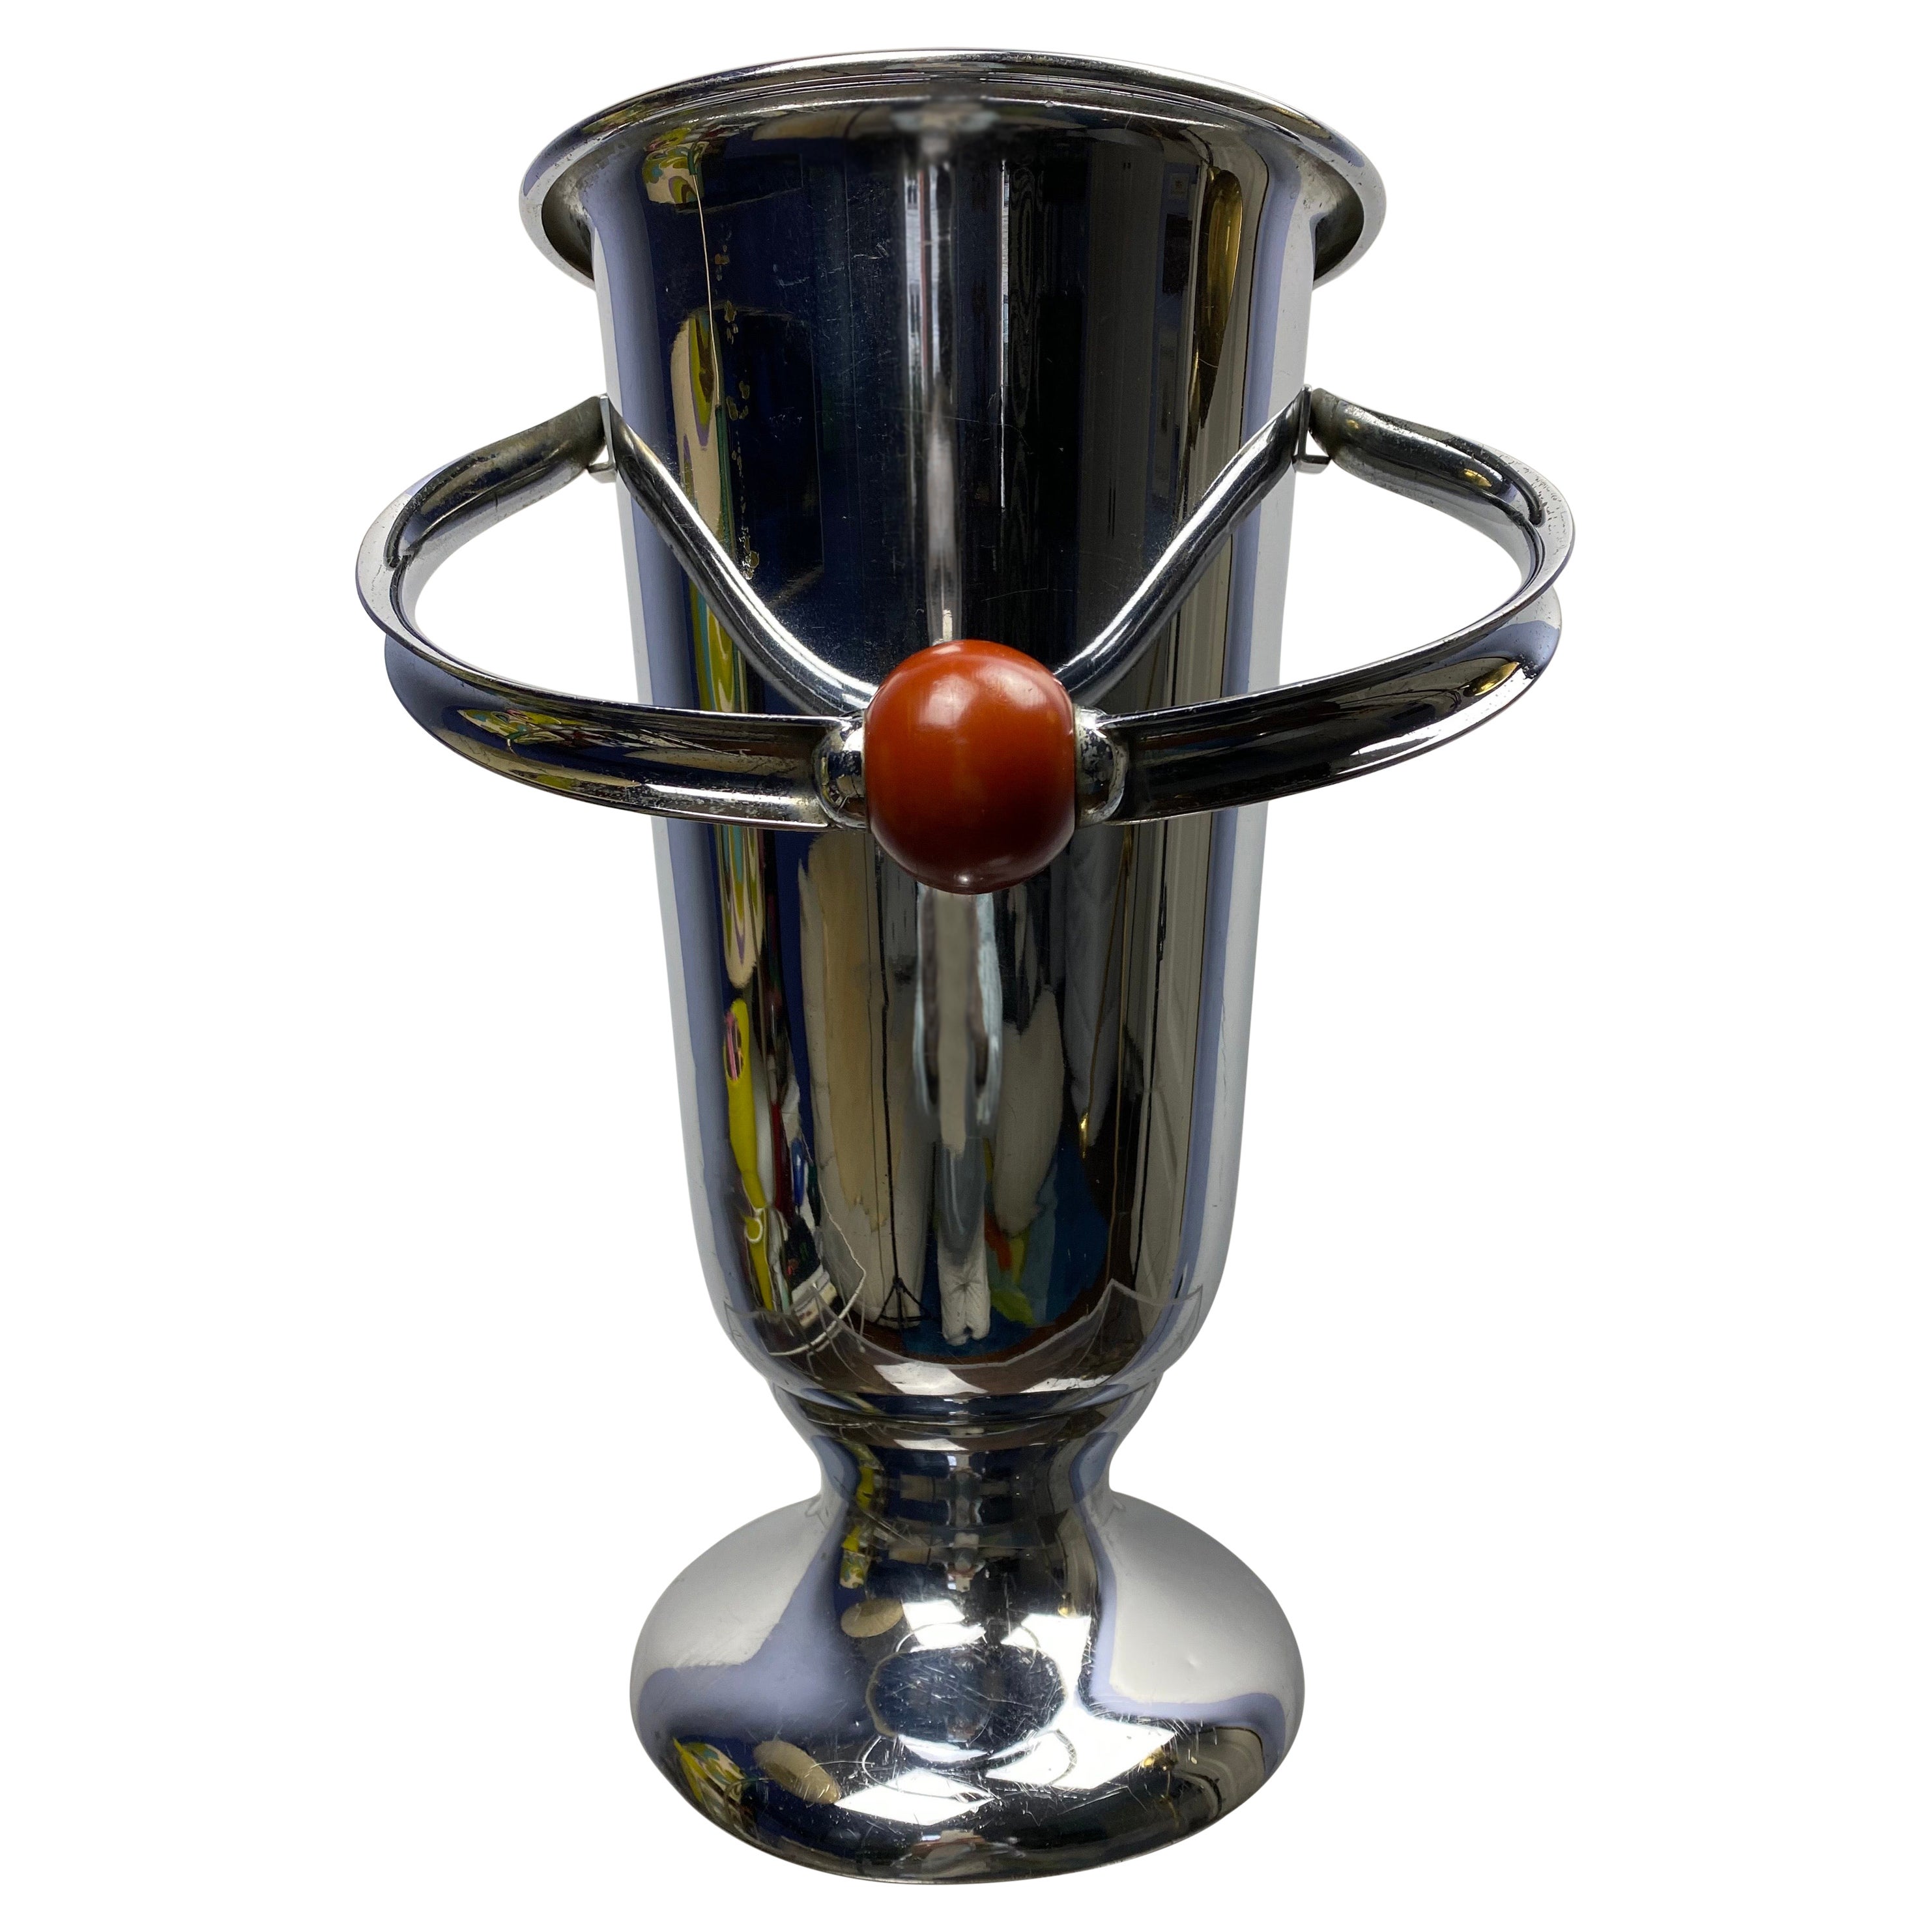 Large Art Deco chromed Brass Champagne or Wine Cooler from WMF, Germany, 1920s